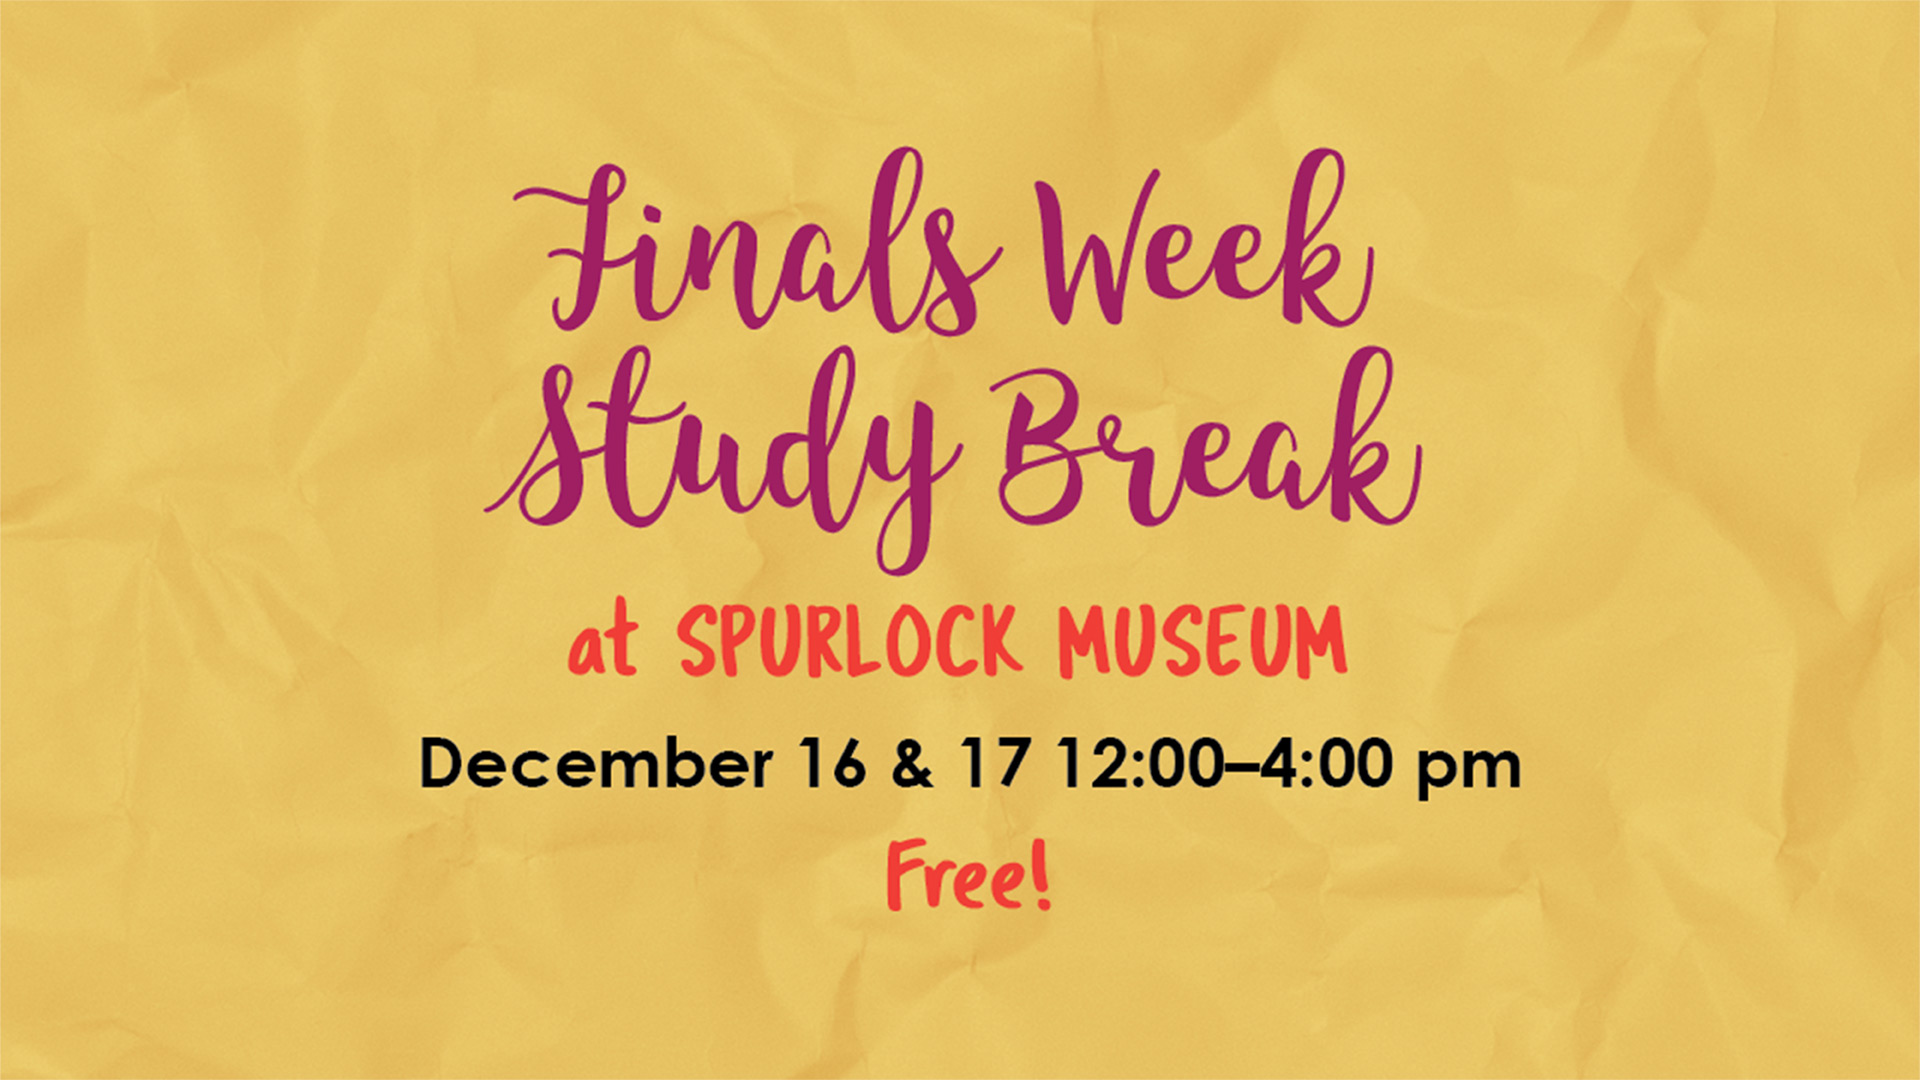 Finals Week Study Break at Spurlock Museum December 16 and 17 12 to 4 pm Free!